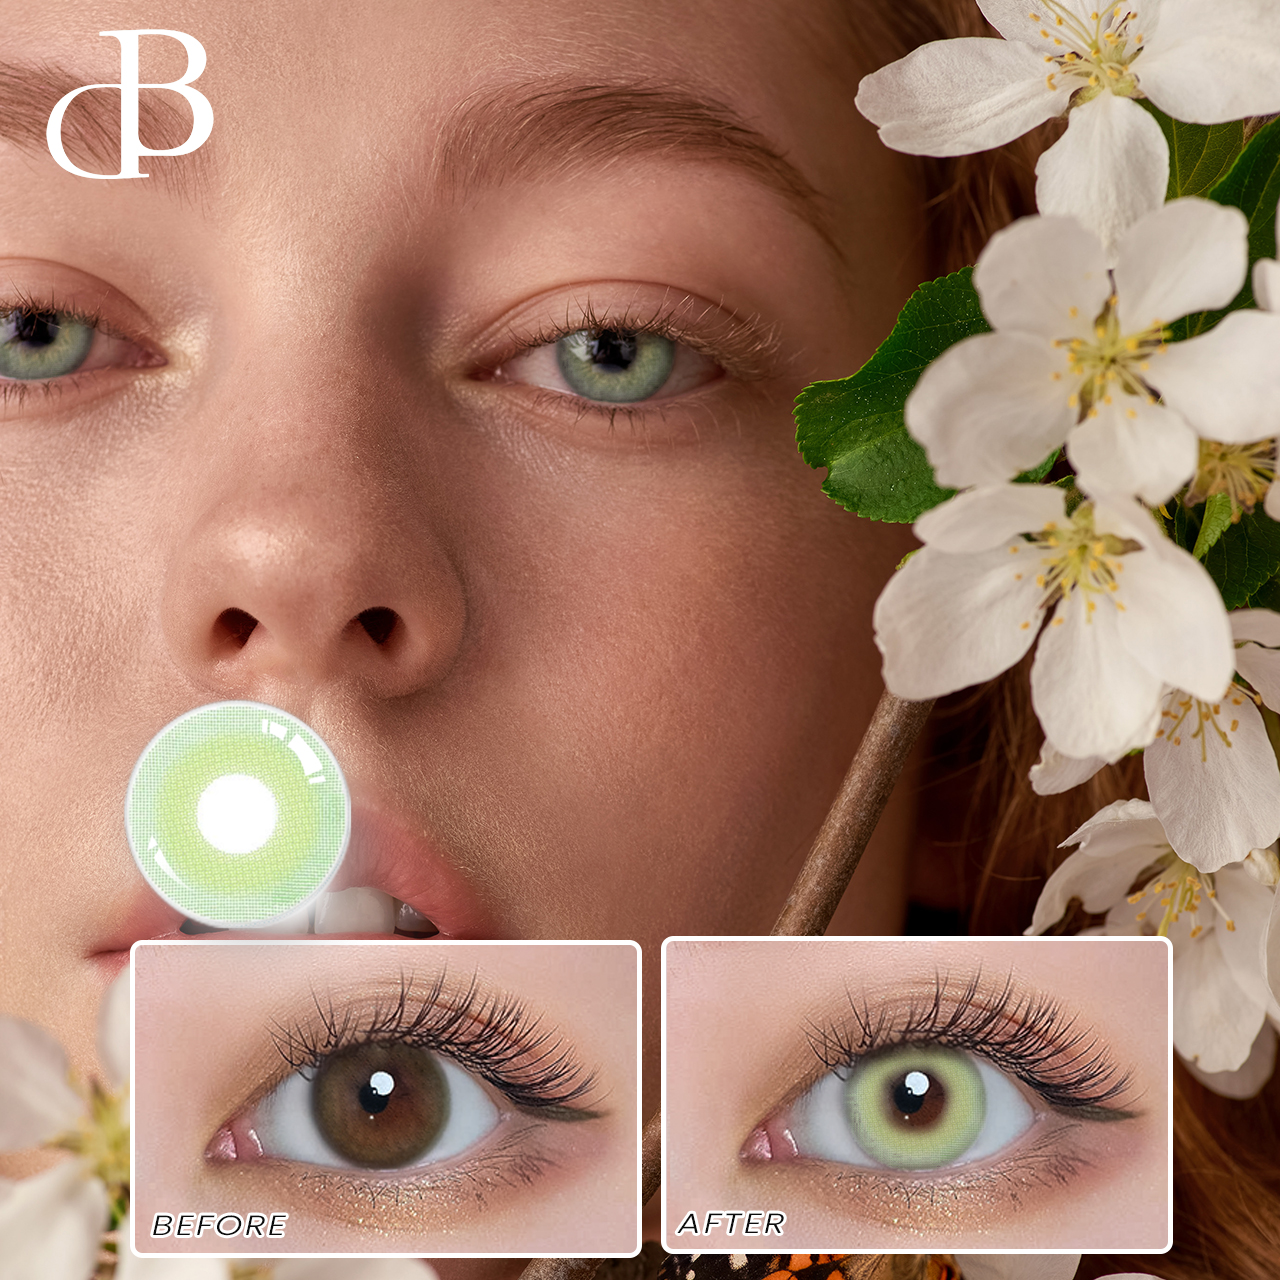 12 colored beauty eye contact lenses accept new look great quality contact lens Featured Image